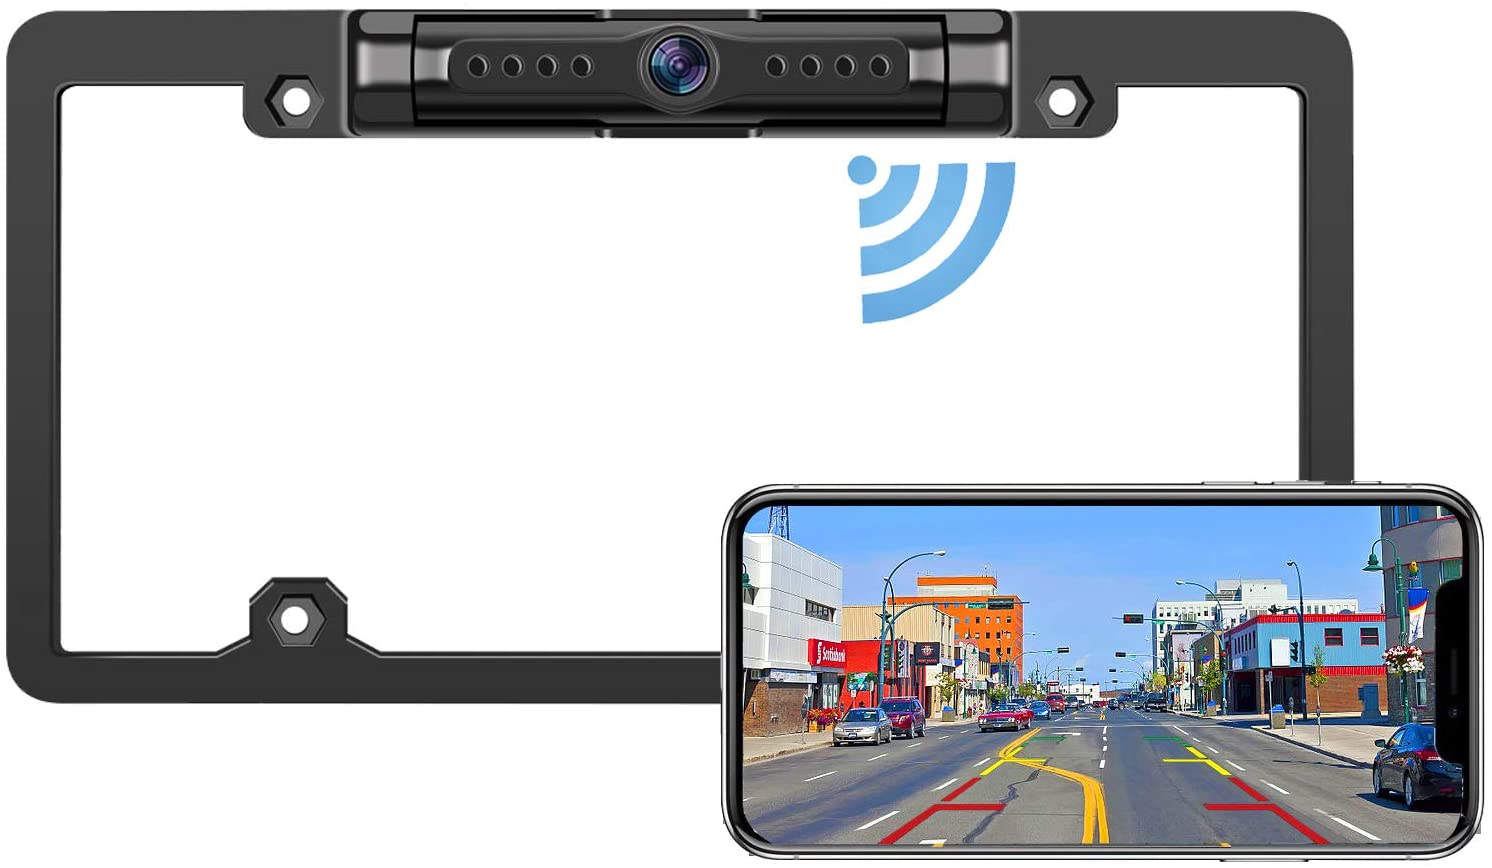 DoHonest WiFi Digital Wireless Backup Camera for iPhone/Android, IP69 Waterproof License Plate Frame Camera for Cars,Trucks,Vans Pickups,SUVs Guide Lines On/Off - V18